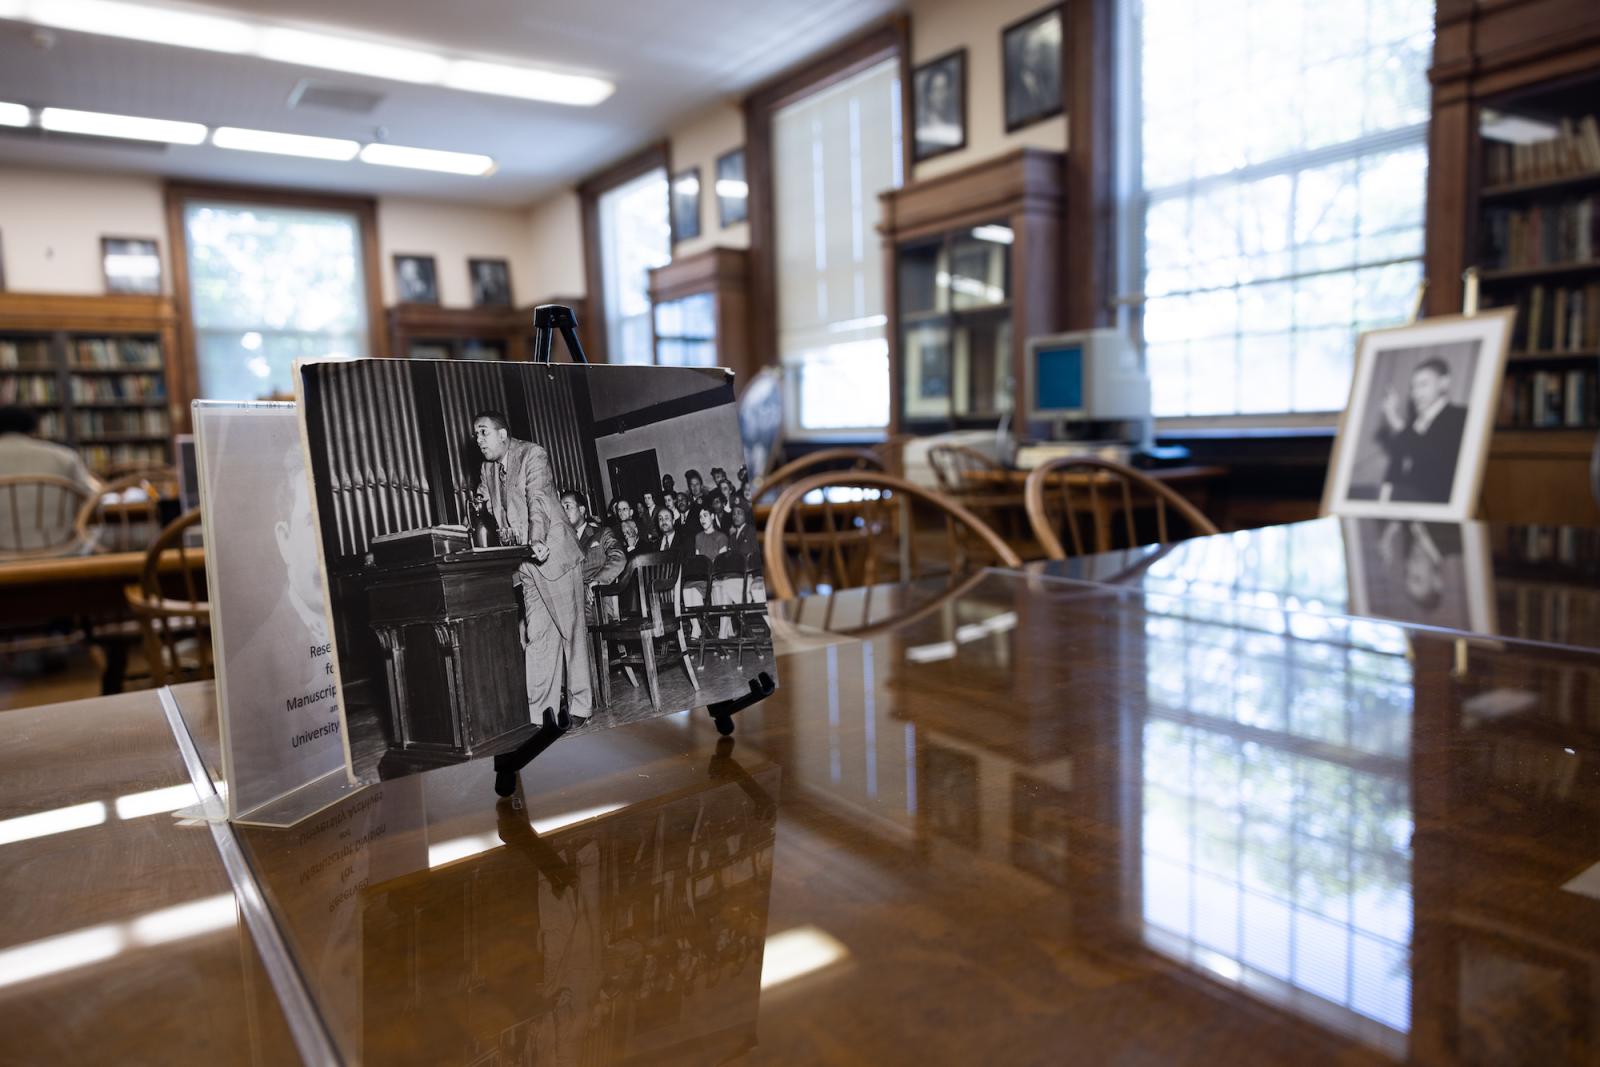 tables with old photos at Moorland-Spingarn